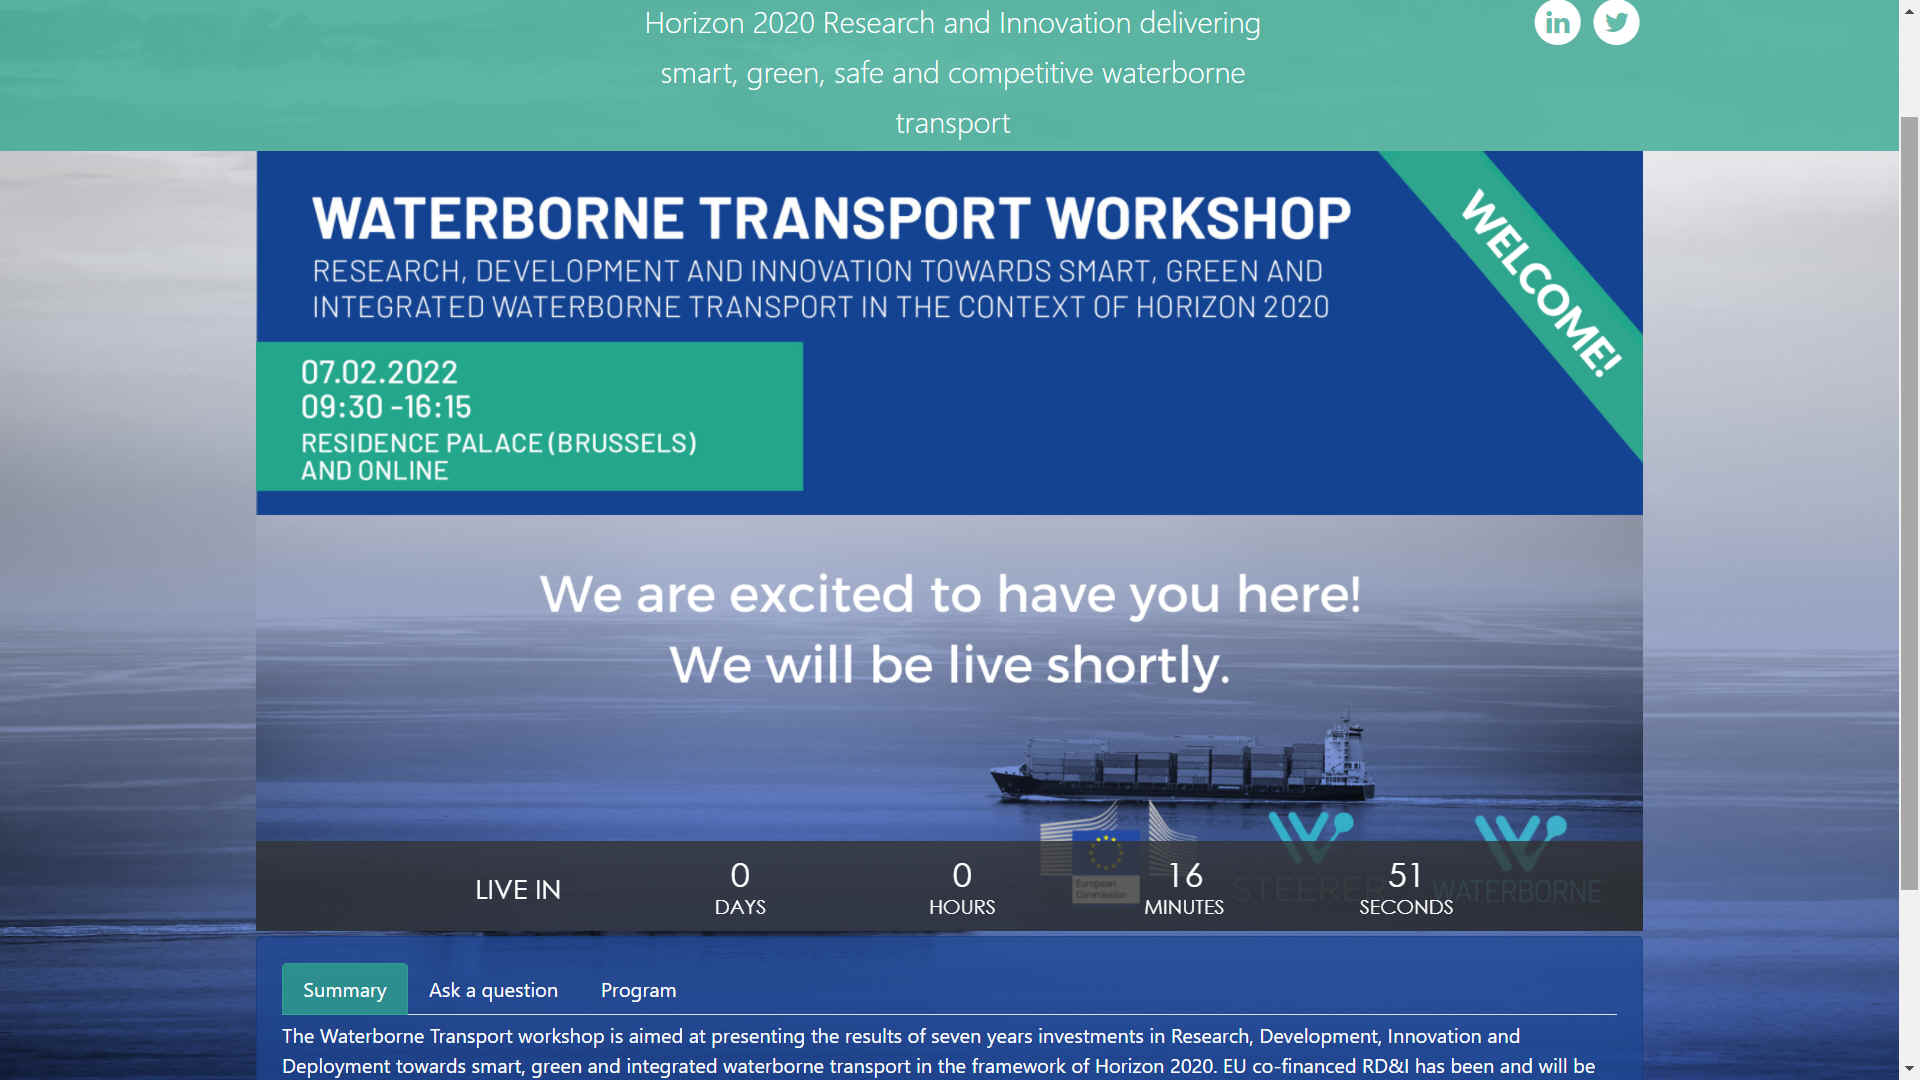 Welcome to Waterborne Transport Workshop 2022 7:45am screen